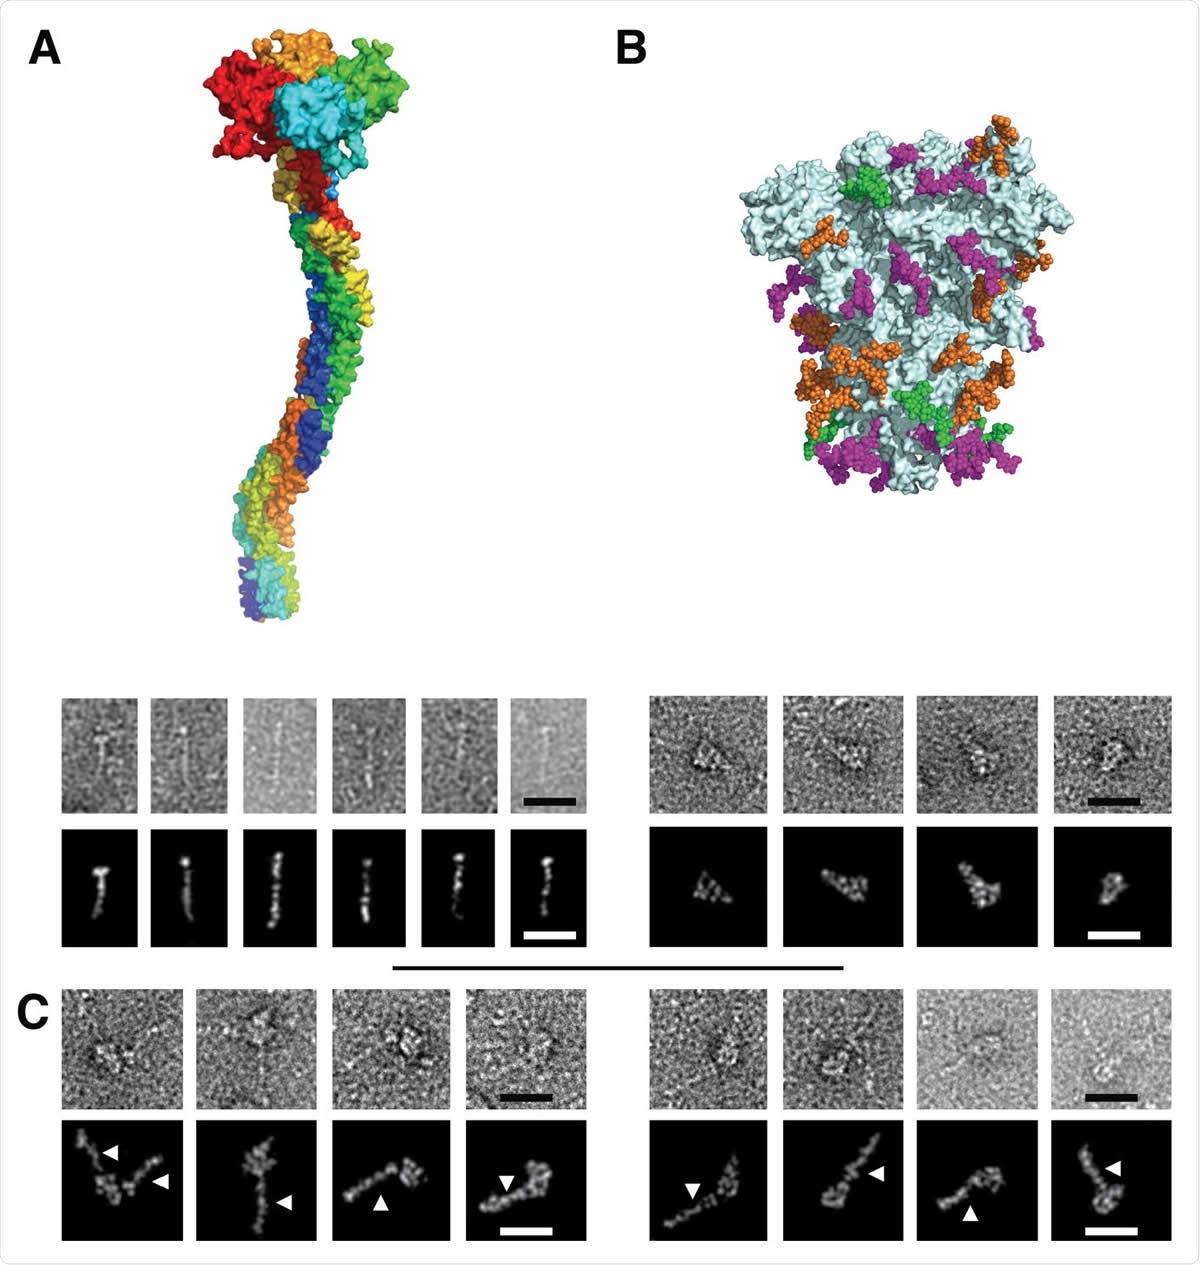 Figure 3. Electron Microscopy micrographs of DC-SIGN/S protein complexes (A) DC-SIGN. Top: model of DC-SIGN ECD tetramer adapted from Tabarani et al (2009). On the bottom: Negative staining images of DC-SIGN. Top row: original images; bottom row: Photoshop processed images. The scale bar represents 25 nm. (B) Spike protein. Top: model of the glycosylated Spike adapted from model of Casalino et al pdb 6vsb). Glycan sites are represented with color code derived from the work of Crispin et coll. (Watanabe et al., 2020a), according to oligomannose-type glycan content, in green (80-100%), orange (30-79%) and magenta (0-29%). On the bottom: Negative staining images of spike protein. Top row: original images, bottom row: Photoshop processed images. The scale bar represents 25 nm. (C) Complex between DC-SIGN and spike protein. Negative staining image of the complexes between DC-SIGN and spike protein. The white arrows highlight DC-SIGN molecules. Top row: original images; bottom row: Photoshop processed images. The scale bar represents 25 nm.